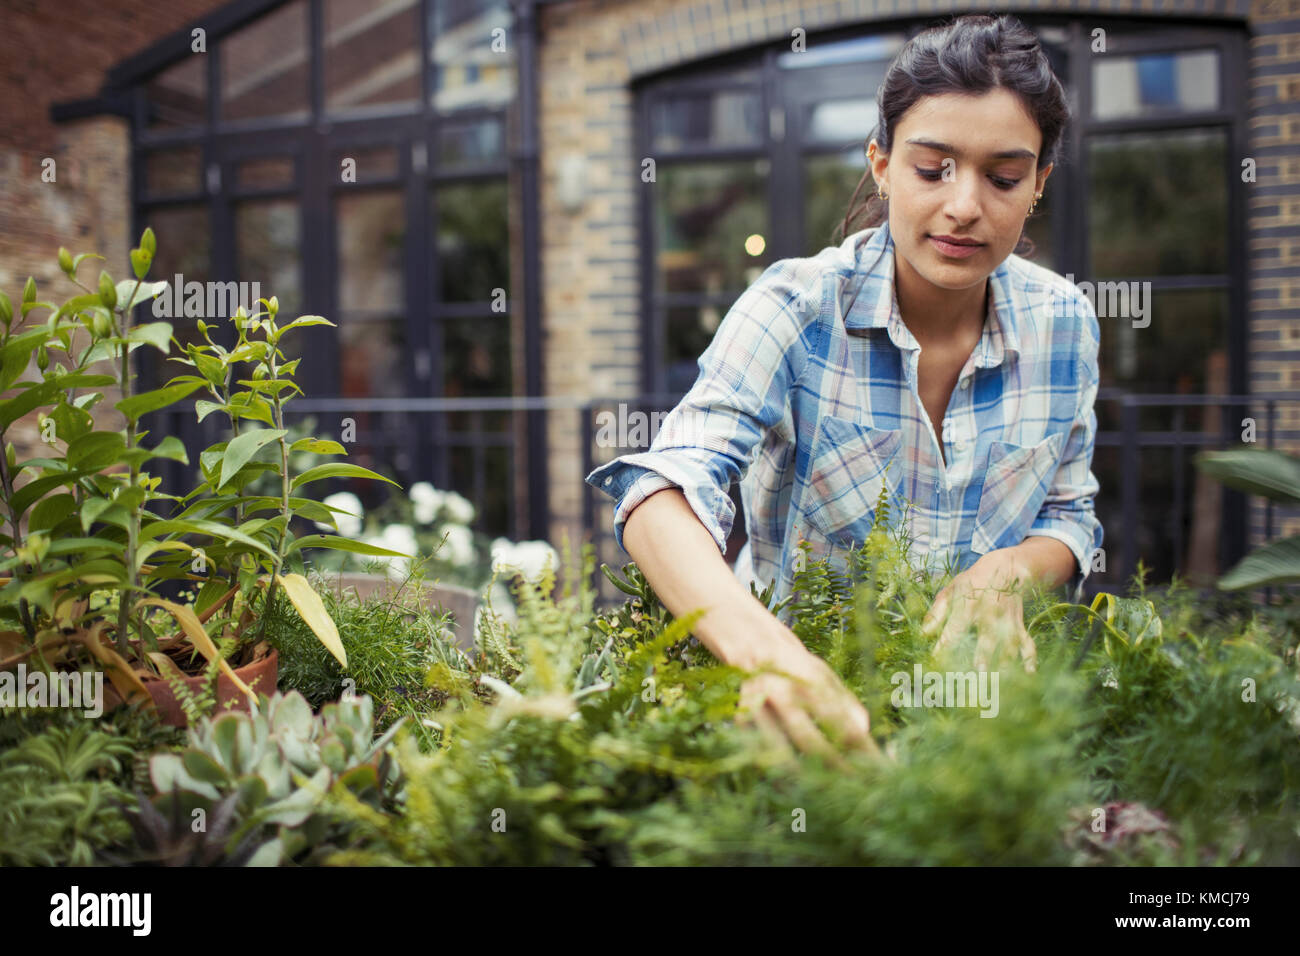 Young woman gardening, checking plants on patio Stock Photo